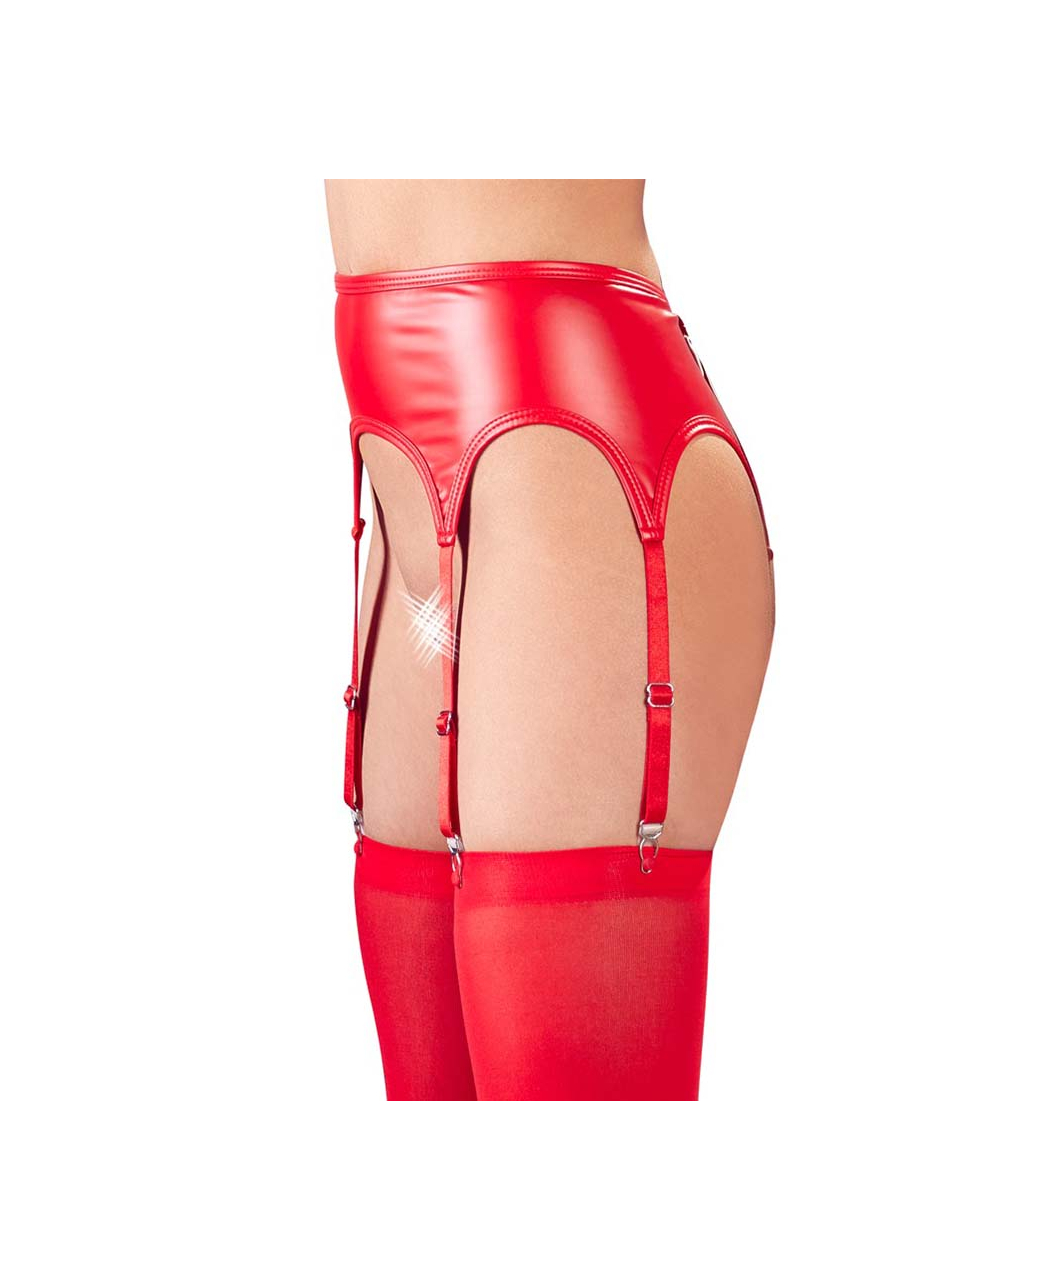 NO:XQSE red matte look garter belt with stockings